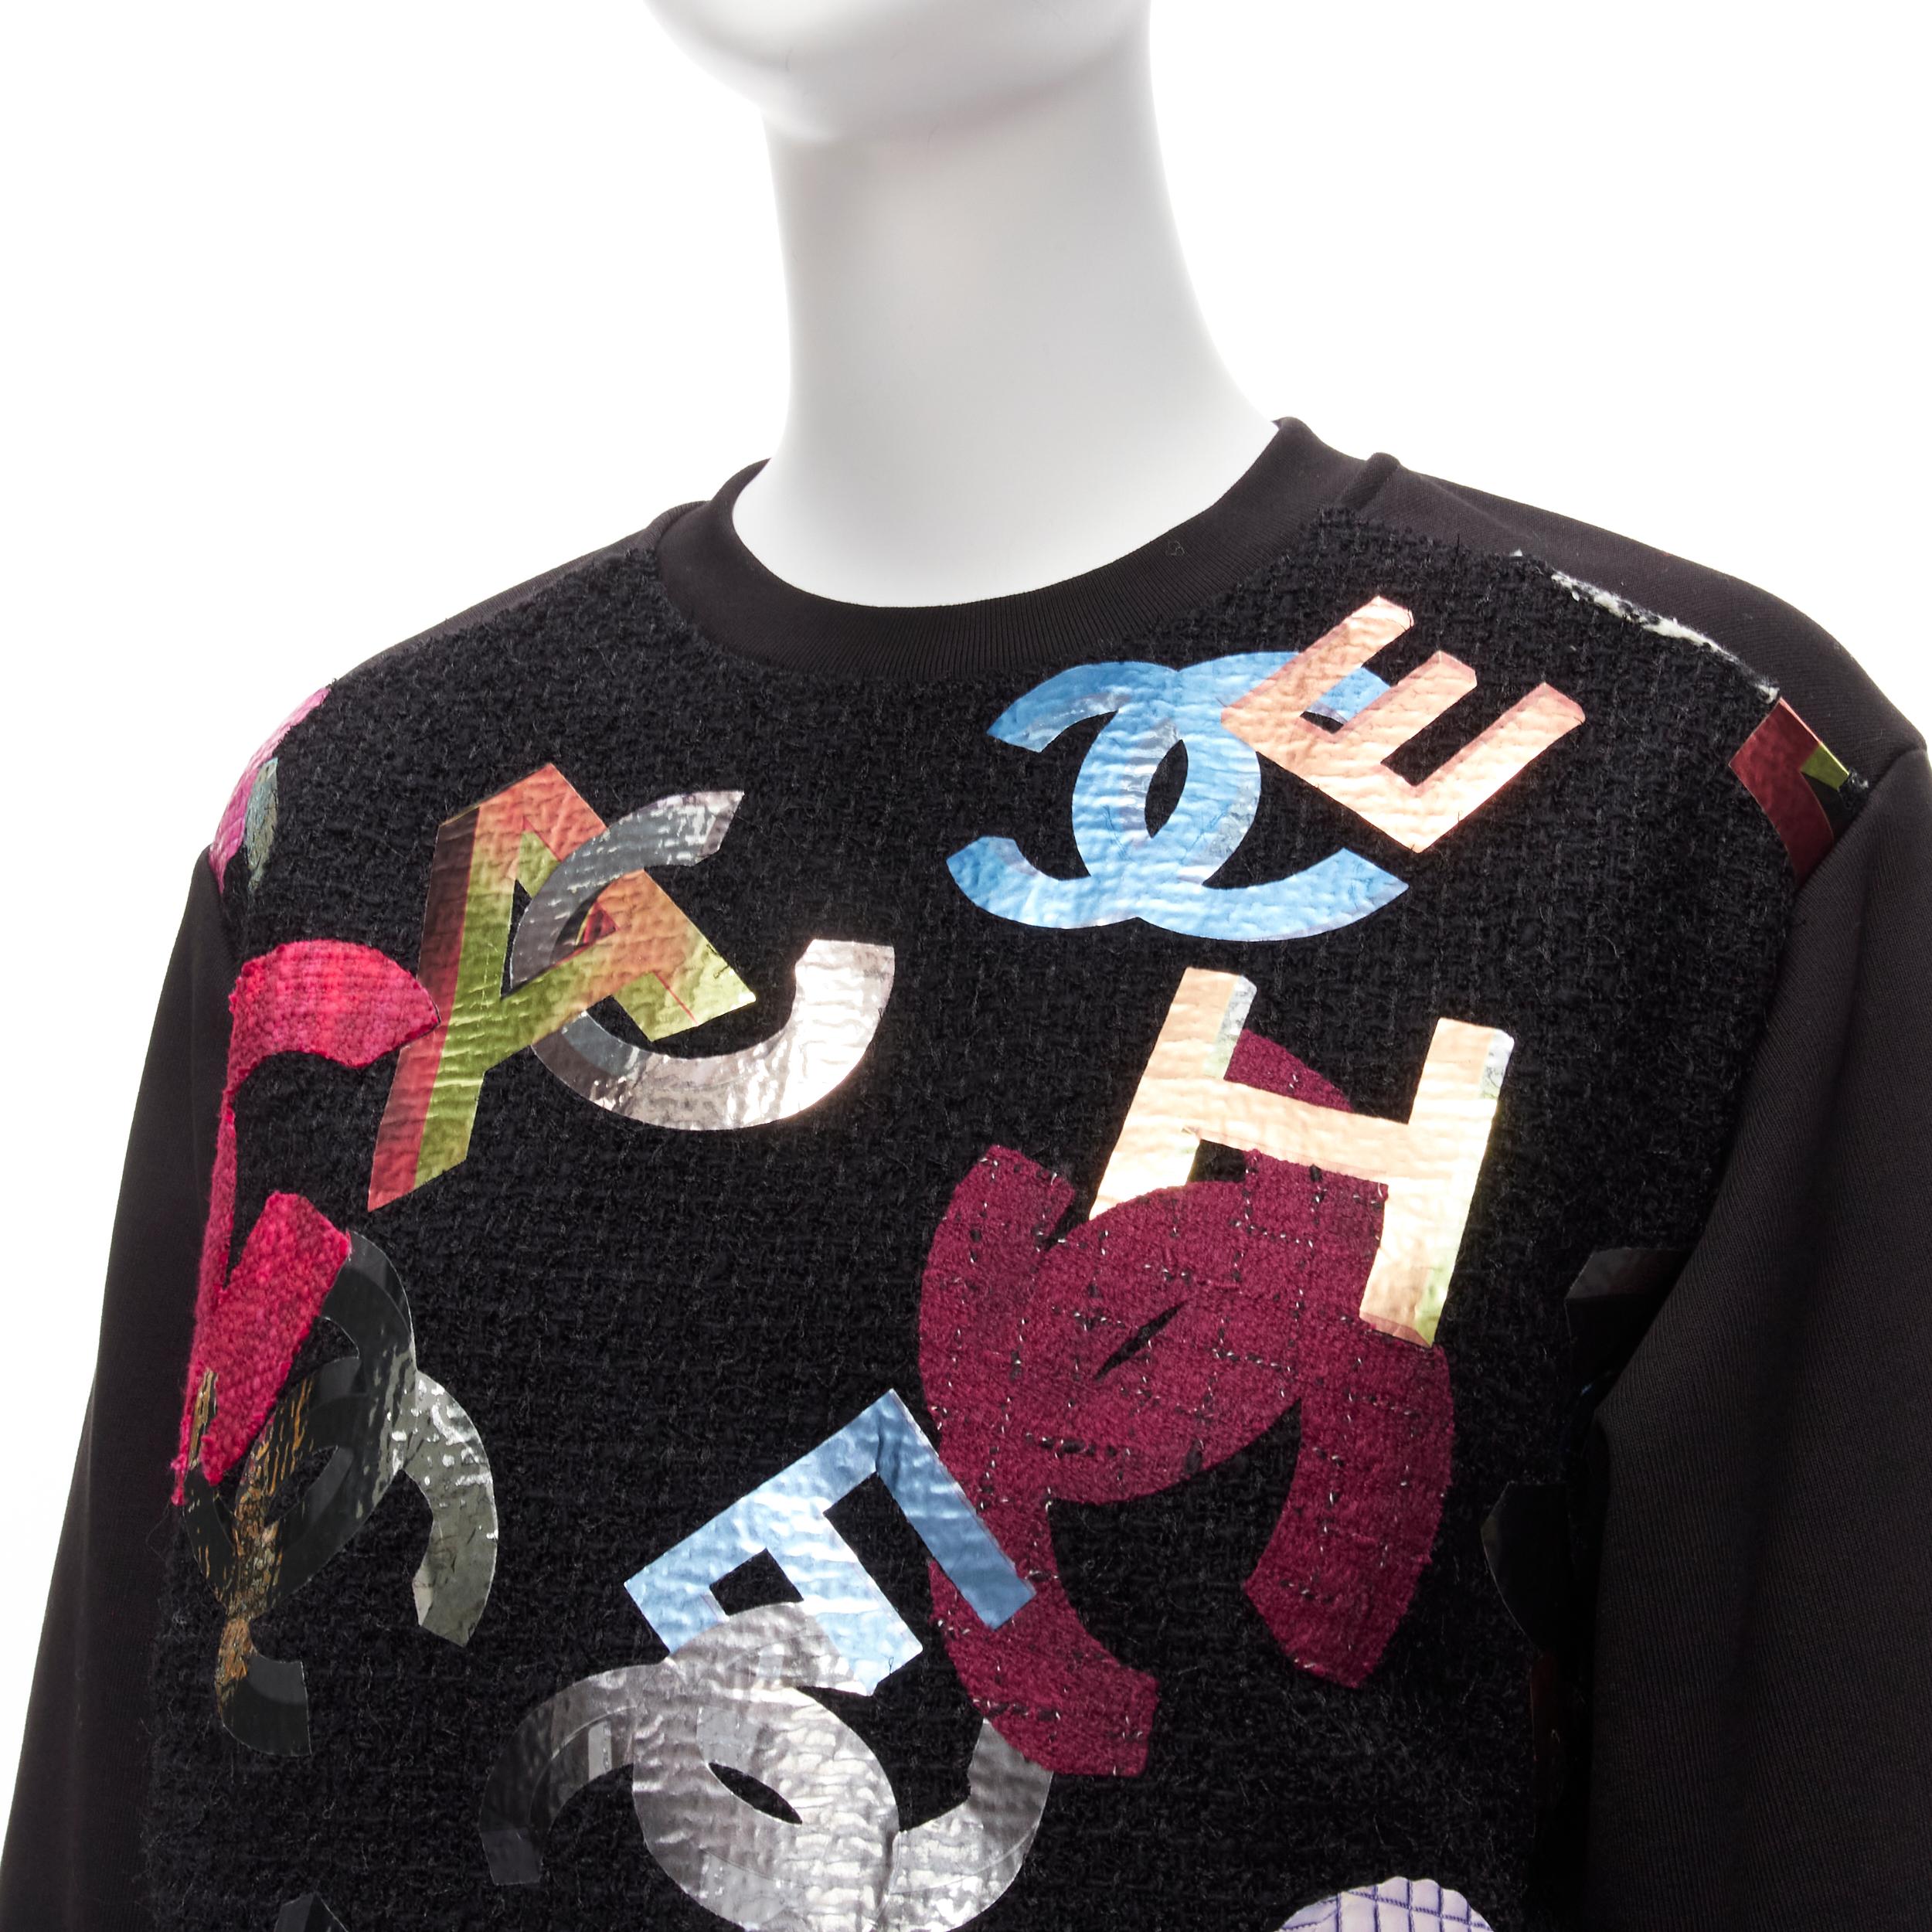 CHANEL 2022 Runway metallic CC logo graphic black tweed crew sweater FR34 XS
Reference: AAWC/A00482
Brand: Chanel
Designer: Virginie Viard
Collection: 2022 Fall Winter
Material: Cotton, Tweed
Color: Black, Multicolour
Pattern: Tweed
Closure: